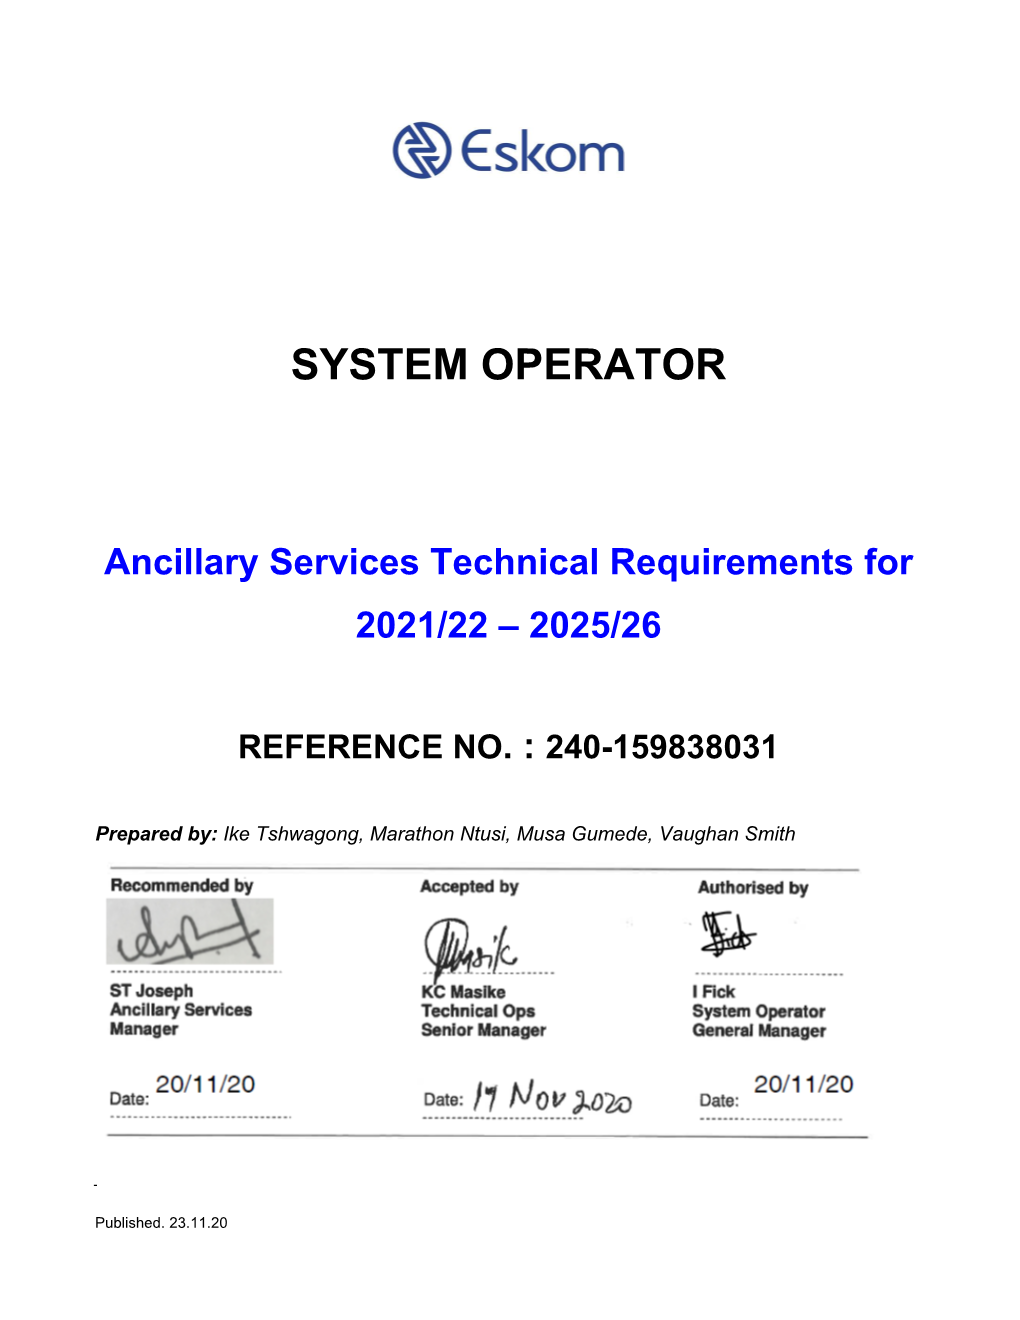 Ancillary Services Technical Requirements for 2020/21 – 2024/25